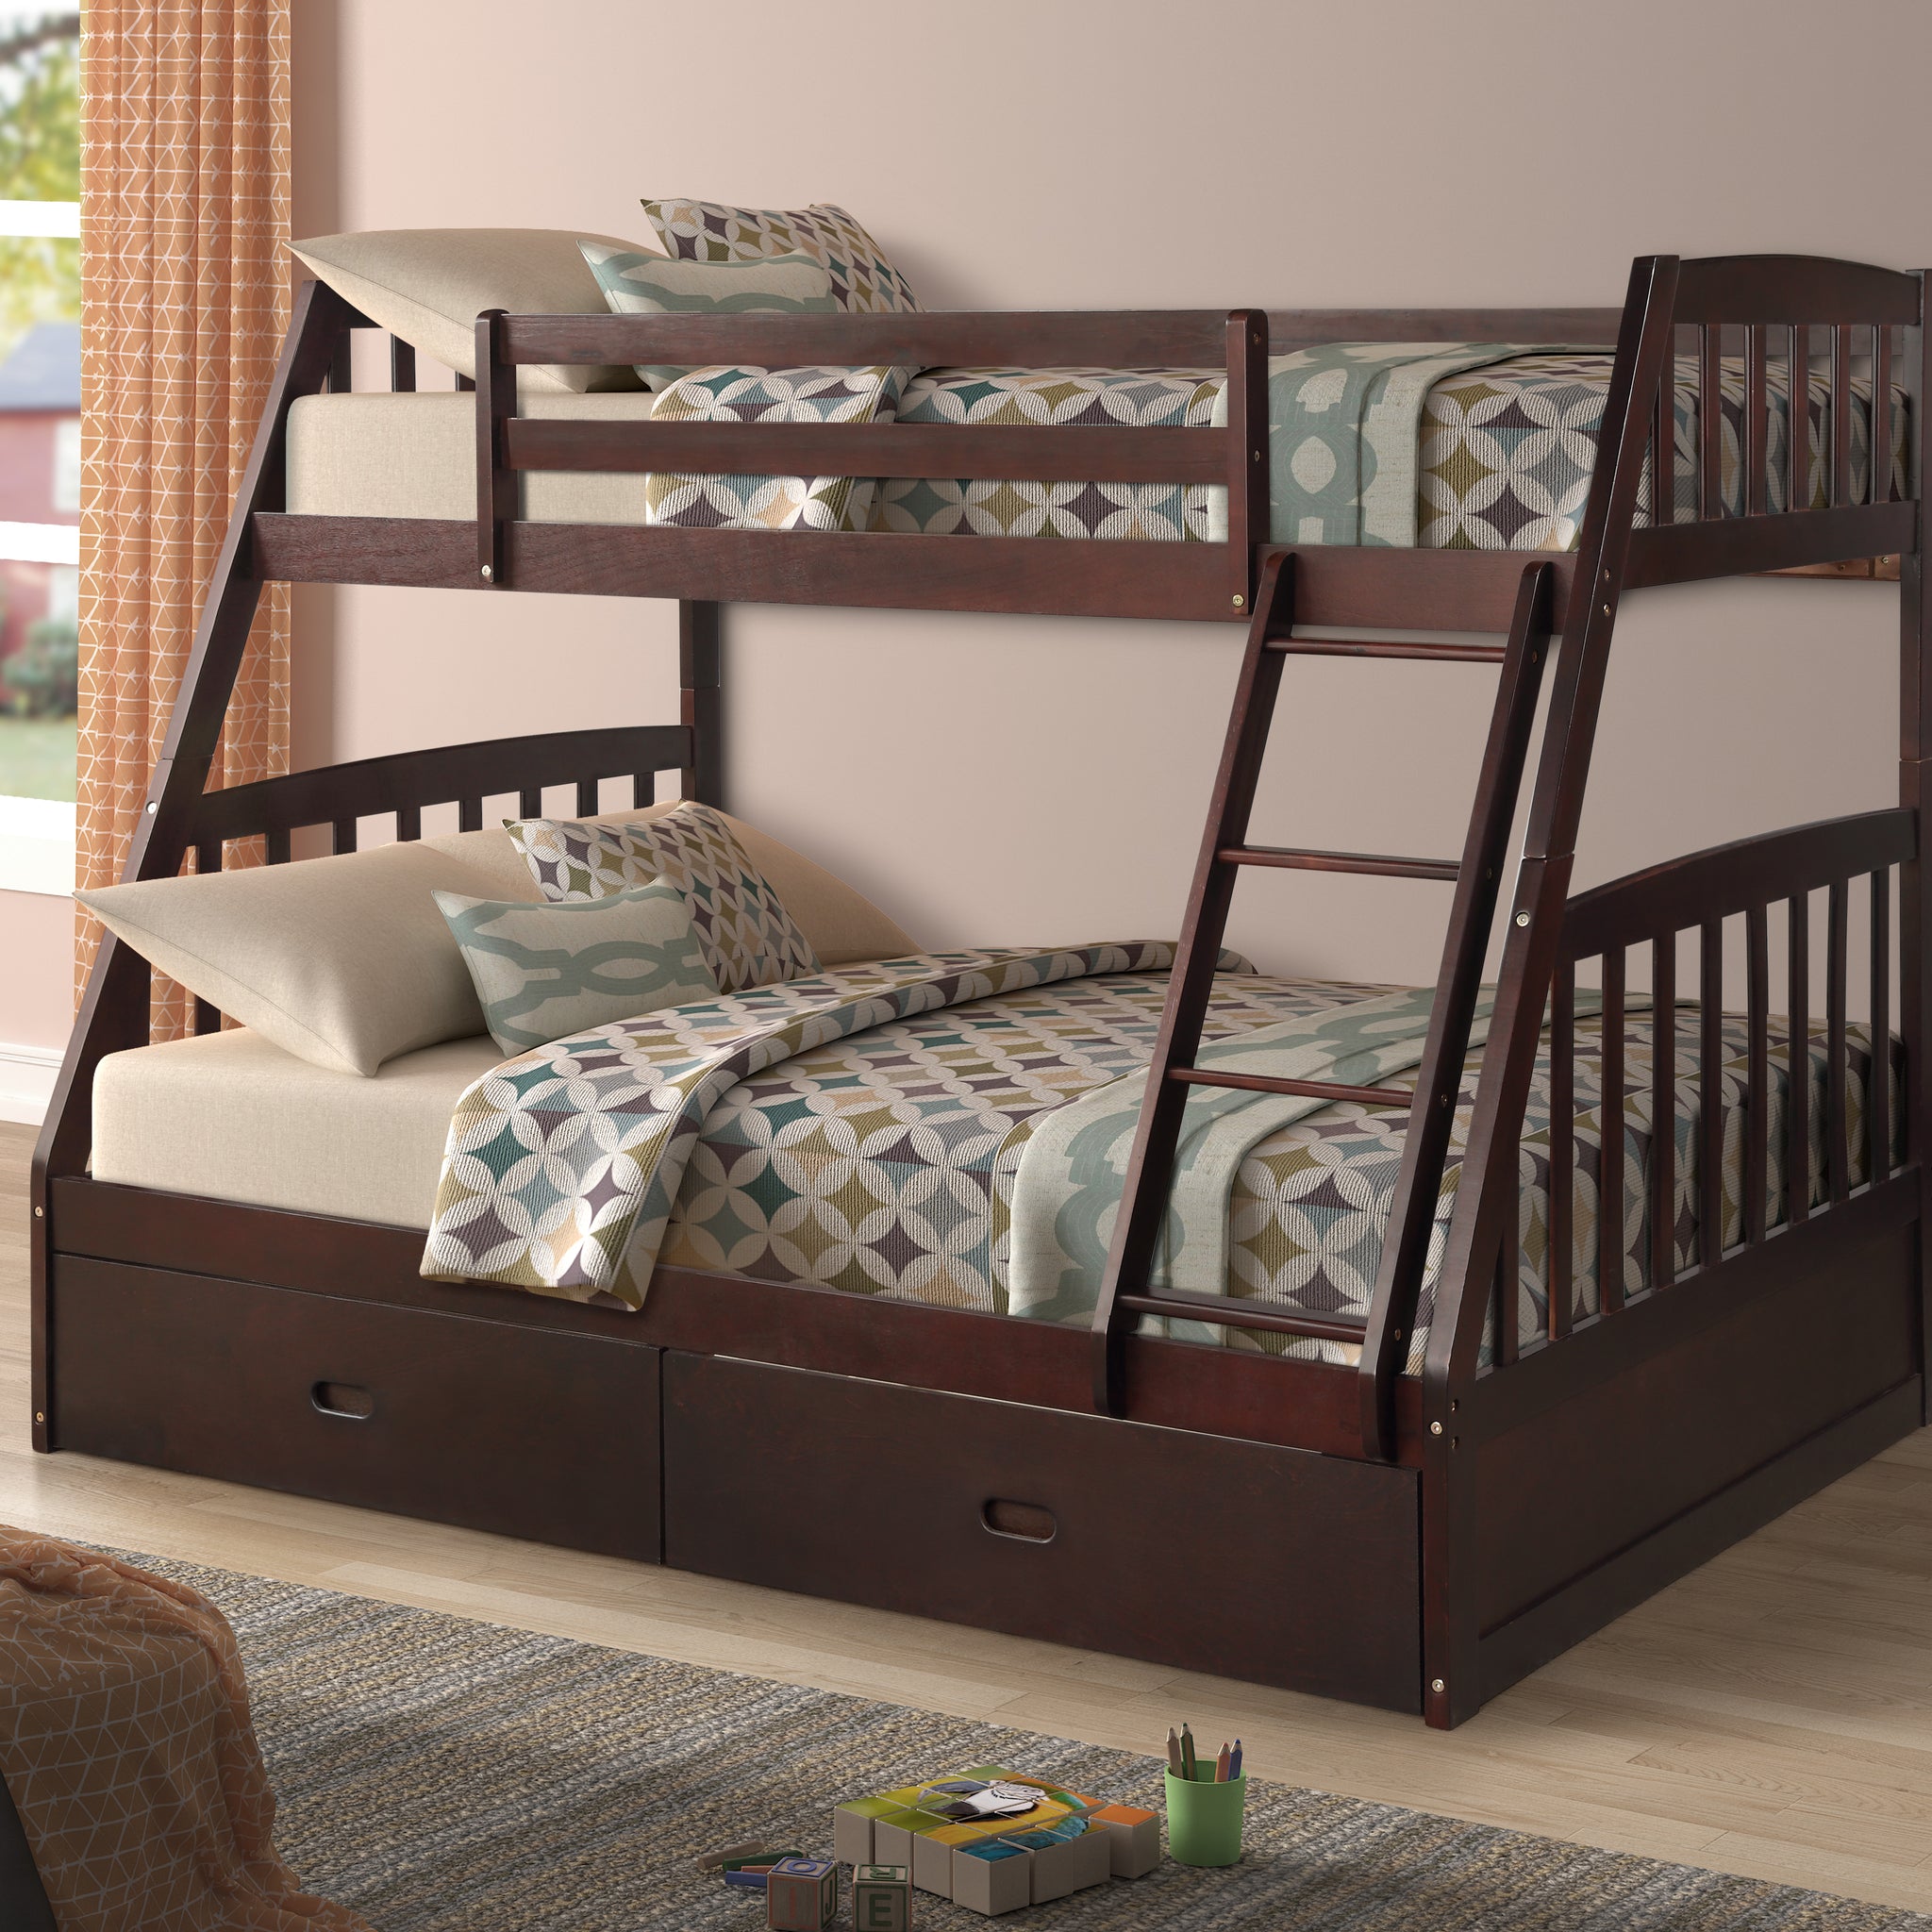 LAKE SIDE BUNK BED - SINGLE OVER DOUBLE WITH 2 DRAWERS SOLID WOOD